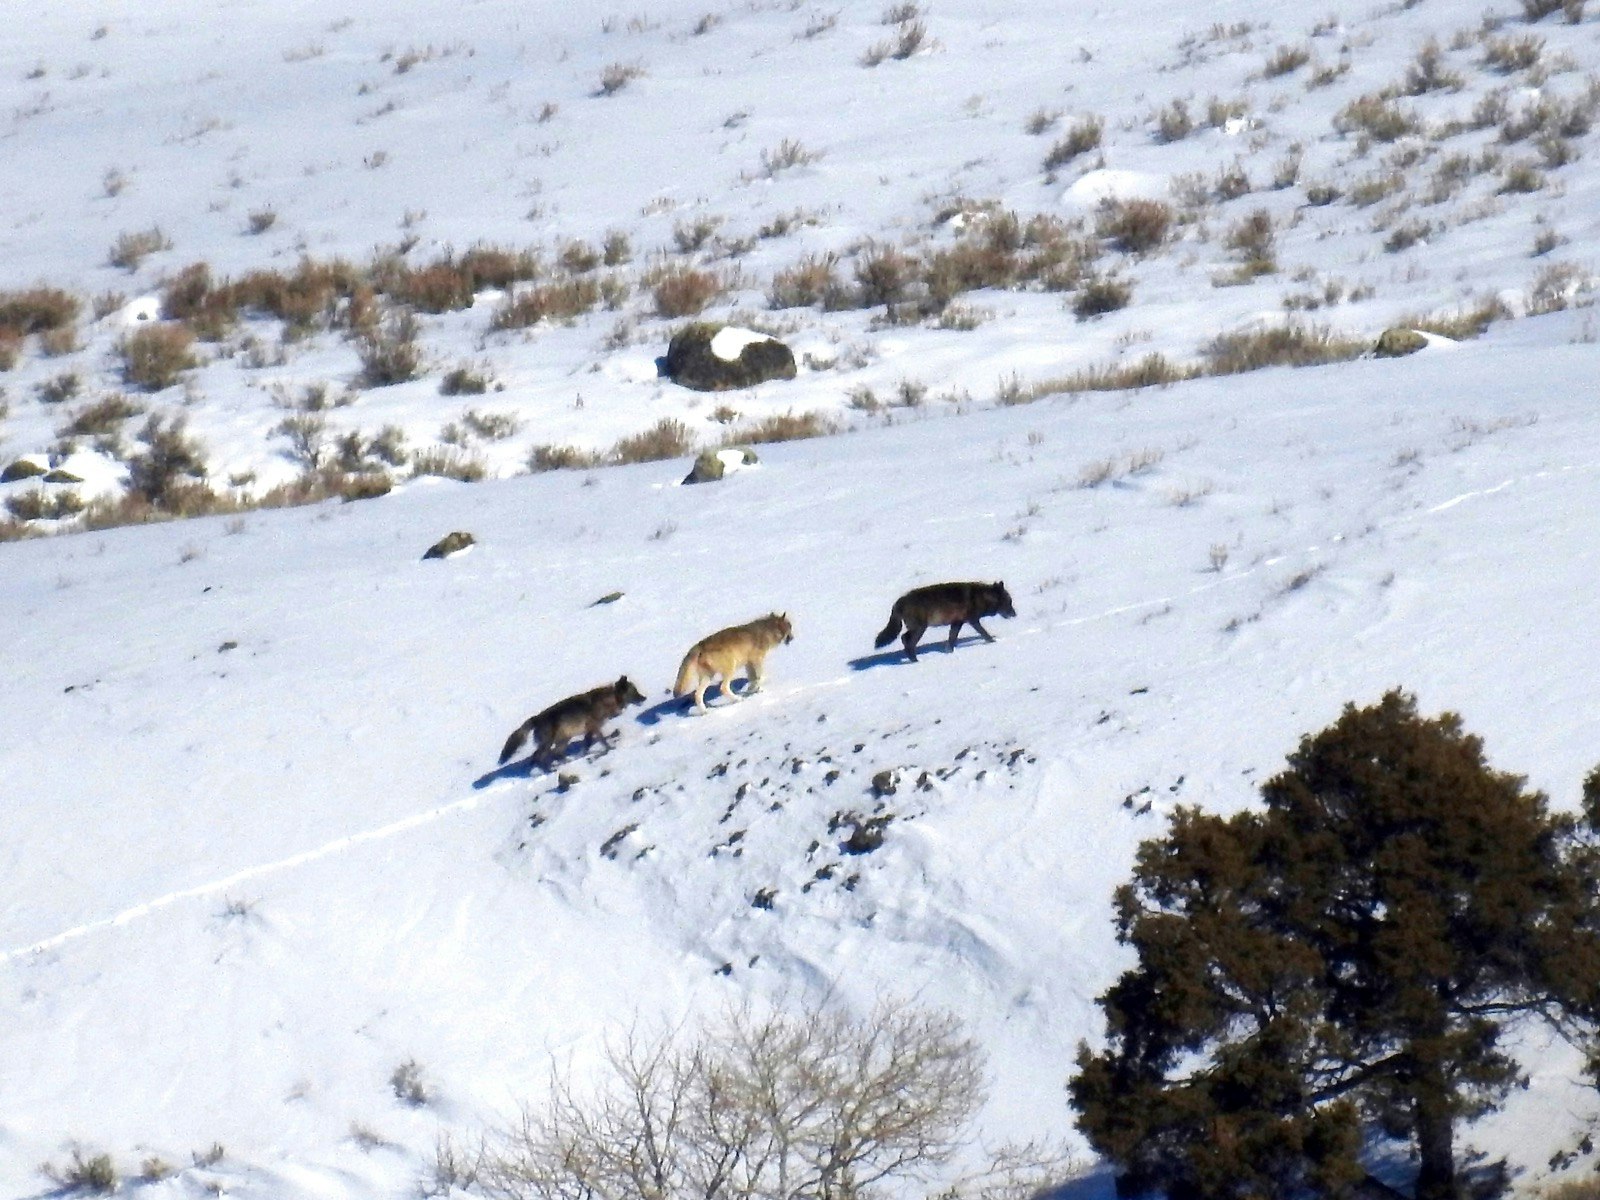 A line of three wolves walks up a snow-covered hill from a distance; Yellowstone winter wildlife